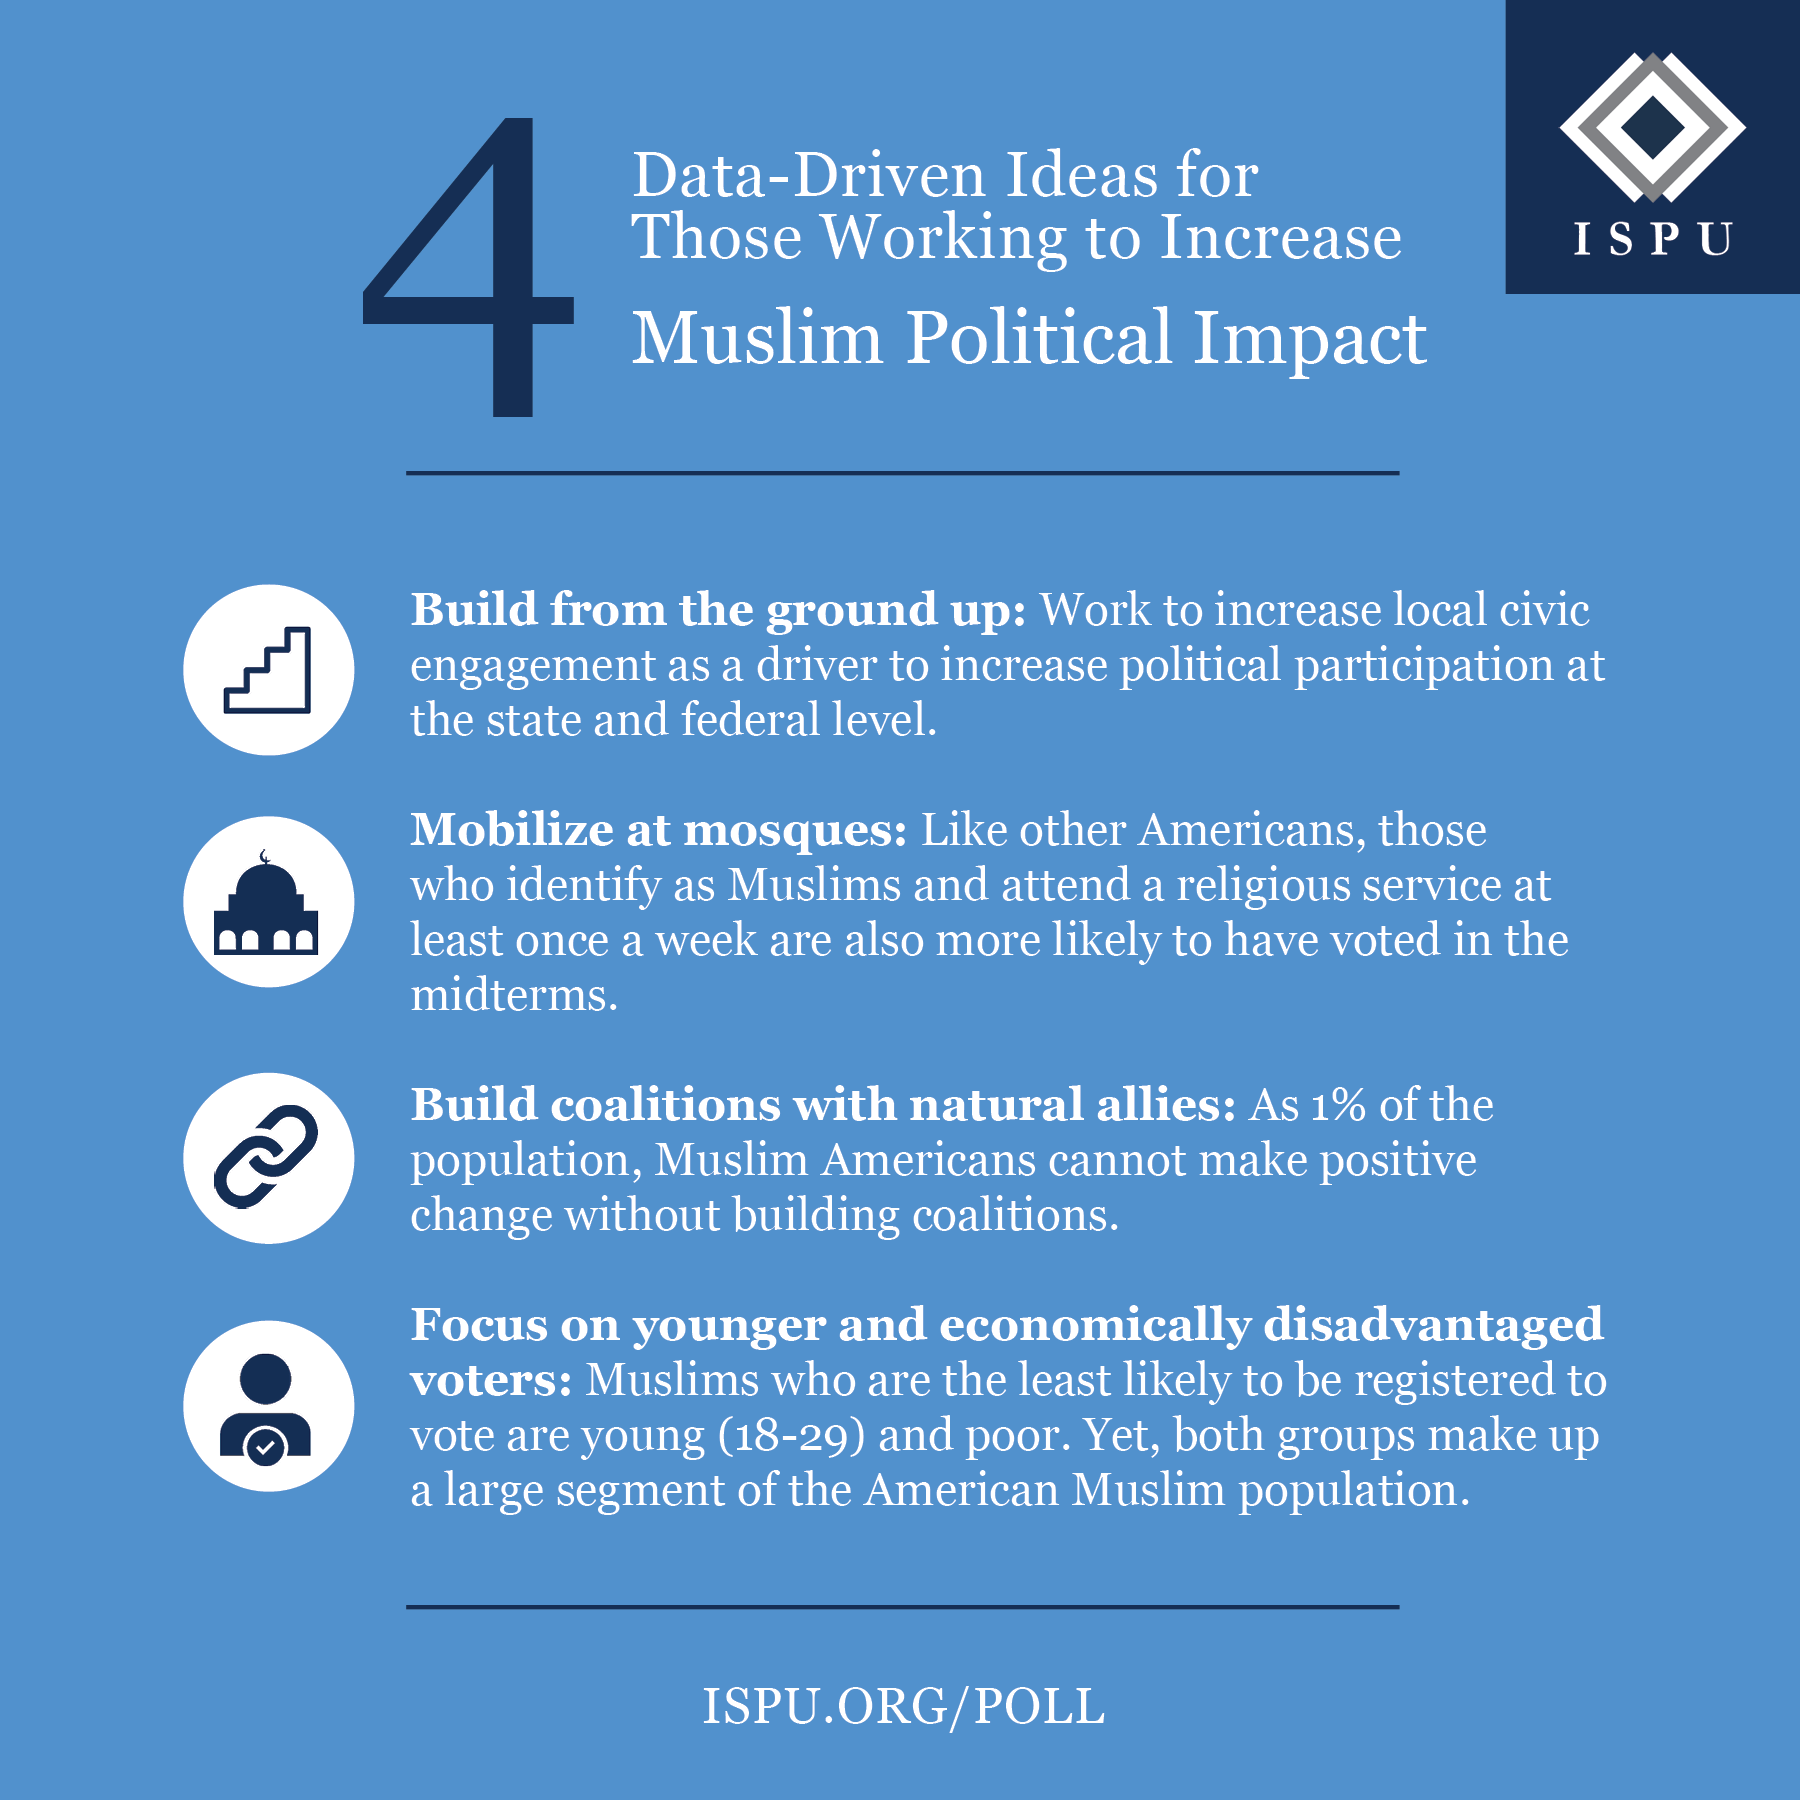 Infographic showing 4 data-driven ideas for those working to increase Muslim political impact